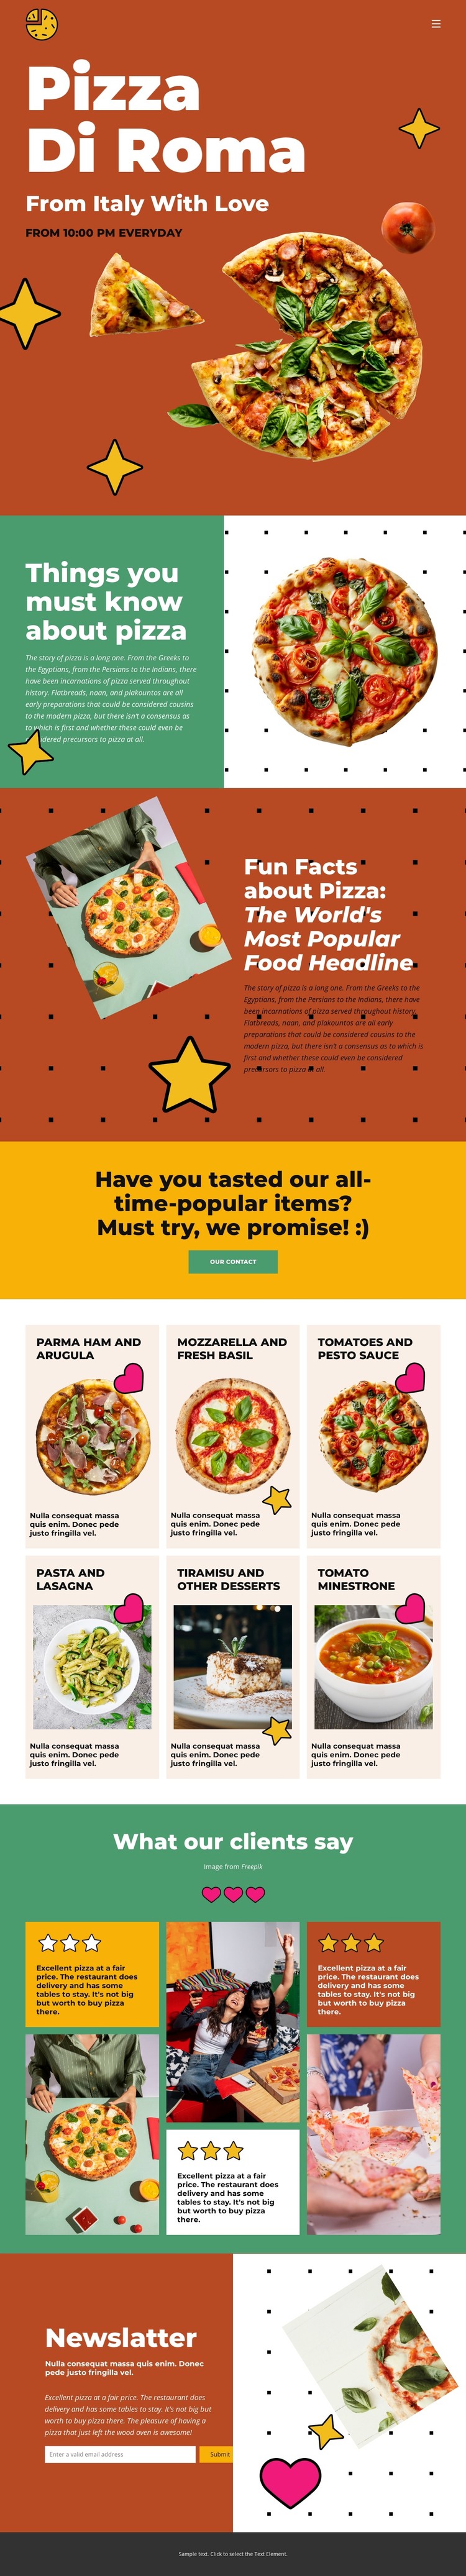 Things you must know about pizza Web Design